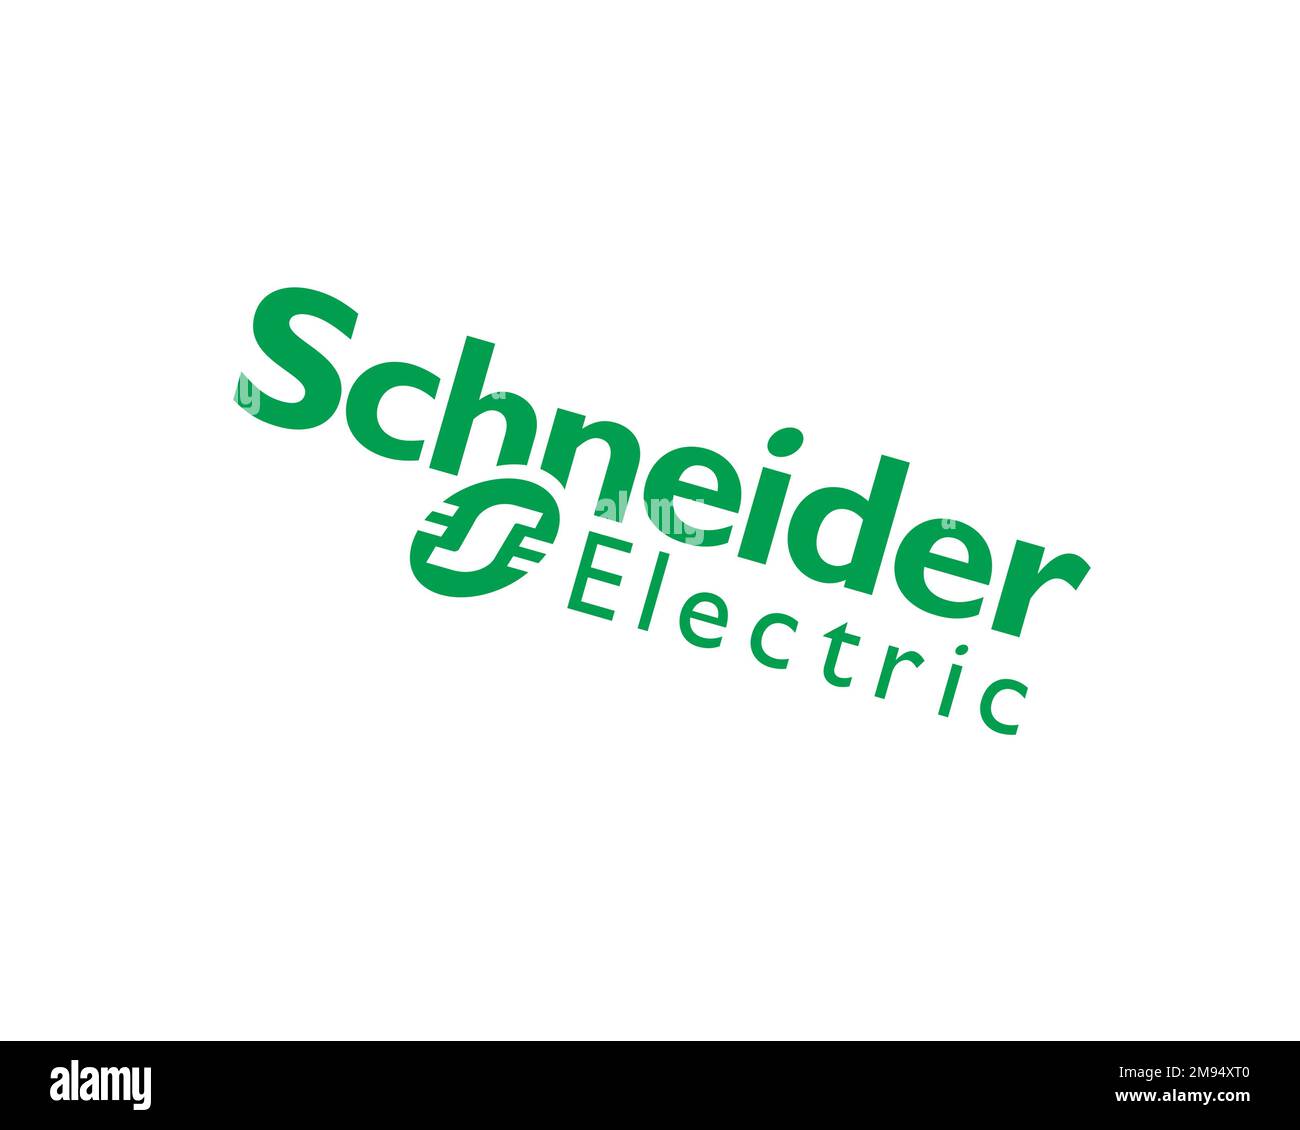 Schneider electric Cut Out Stock Images & Pictures - Alamy